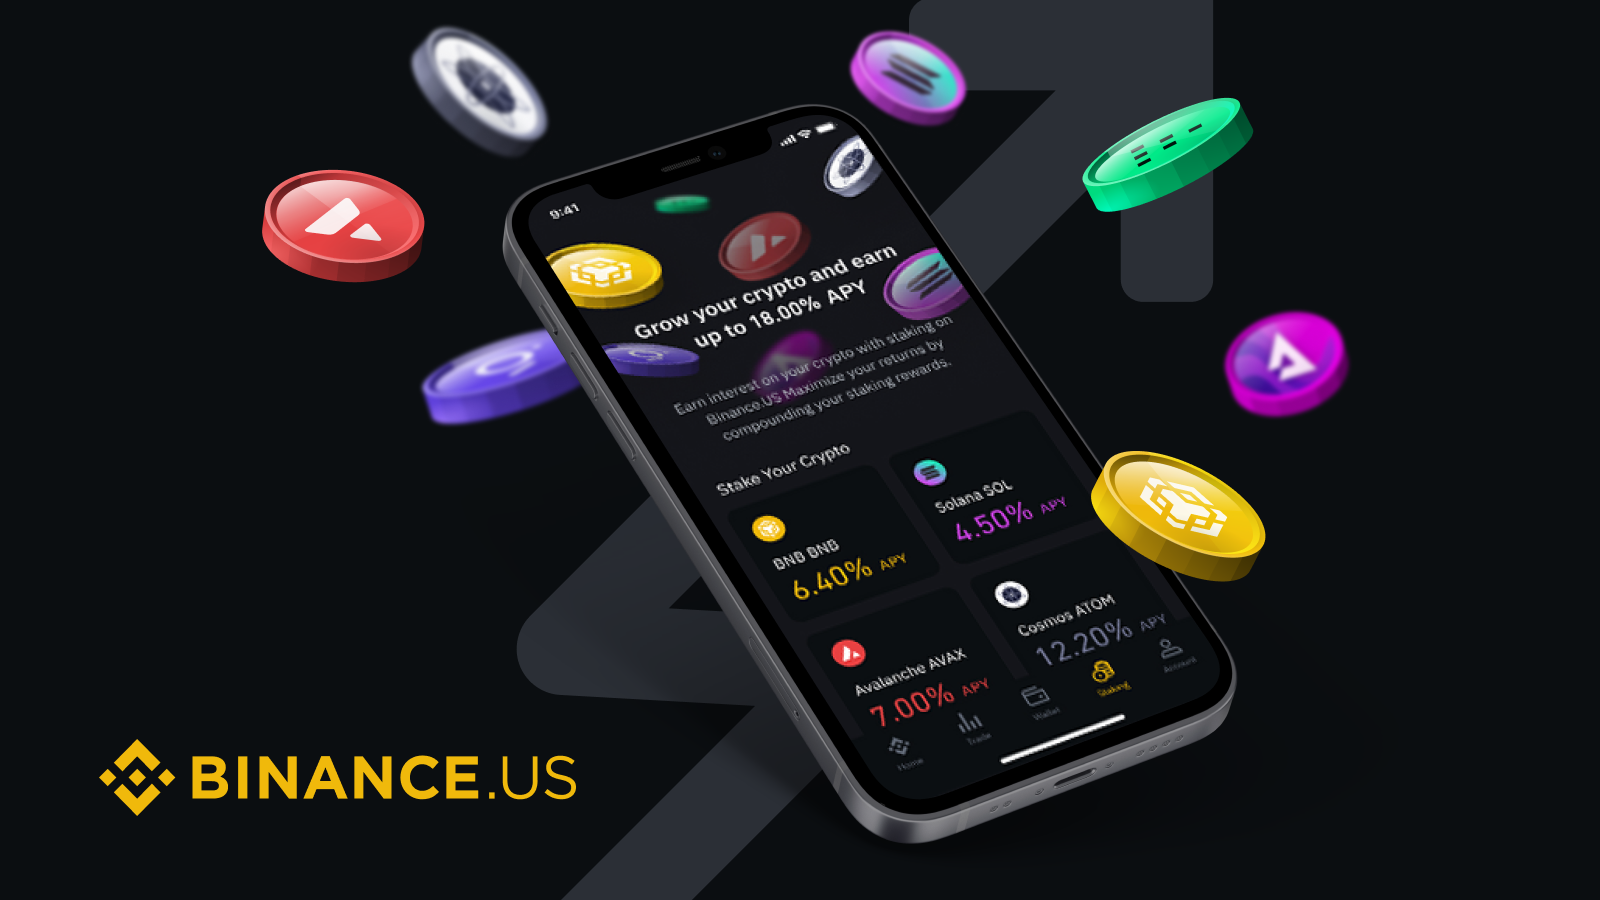 Binance.US Launches New Staking Product, Empowering Customers to Do More With Their Money